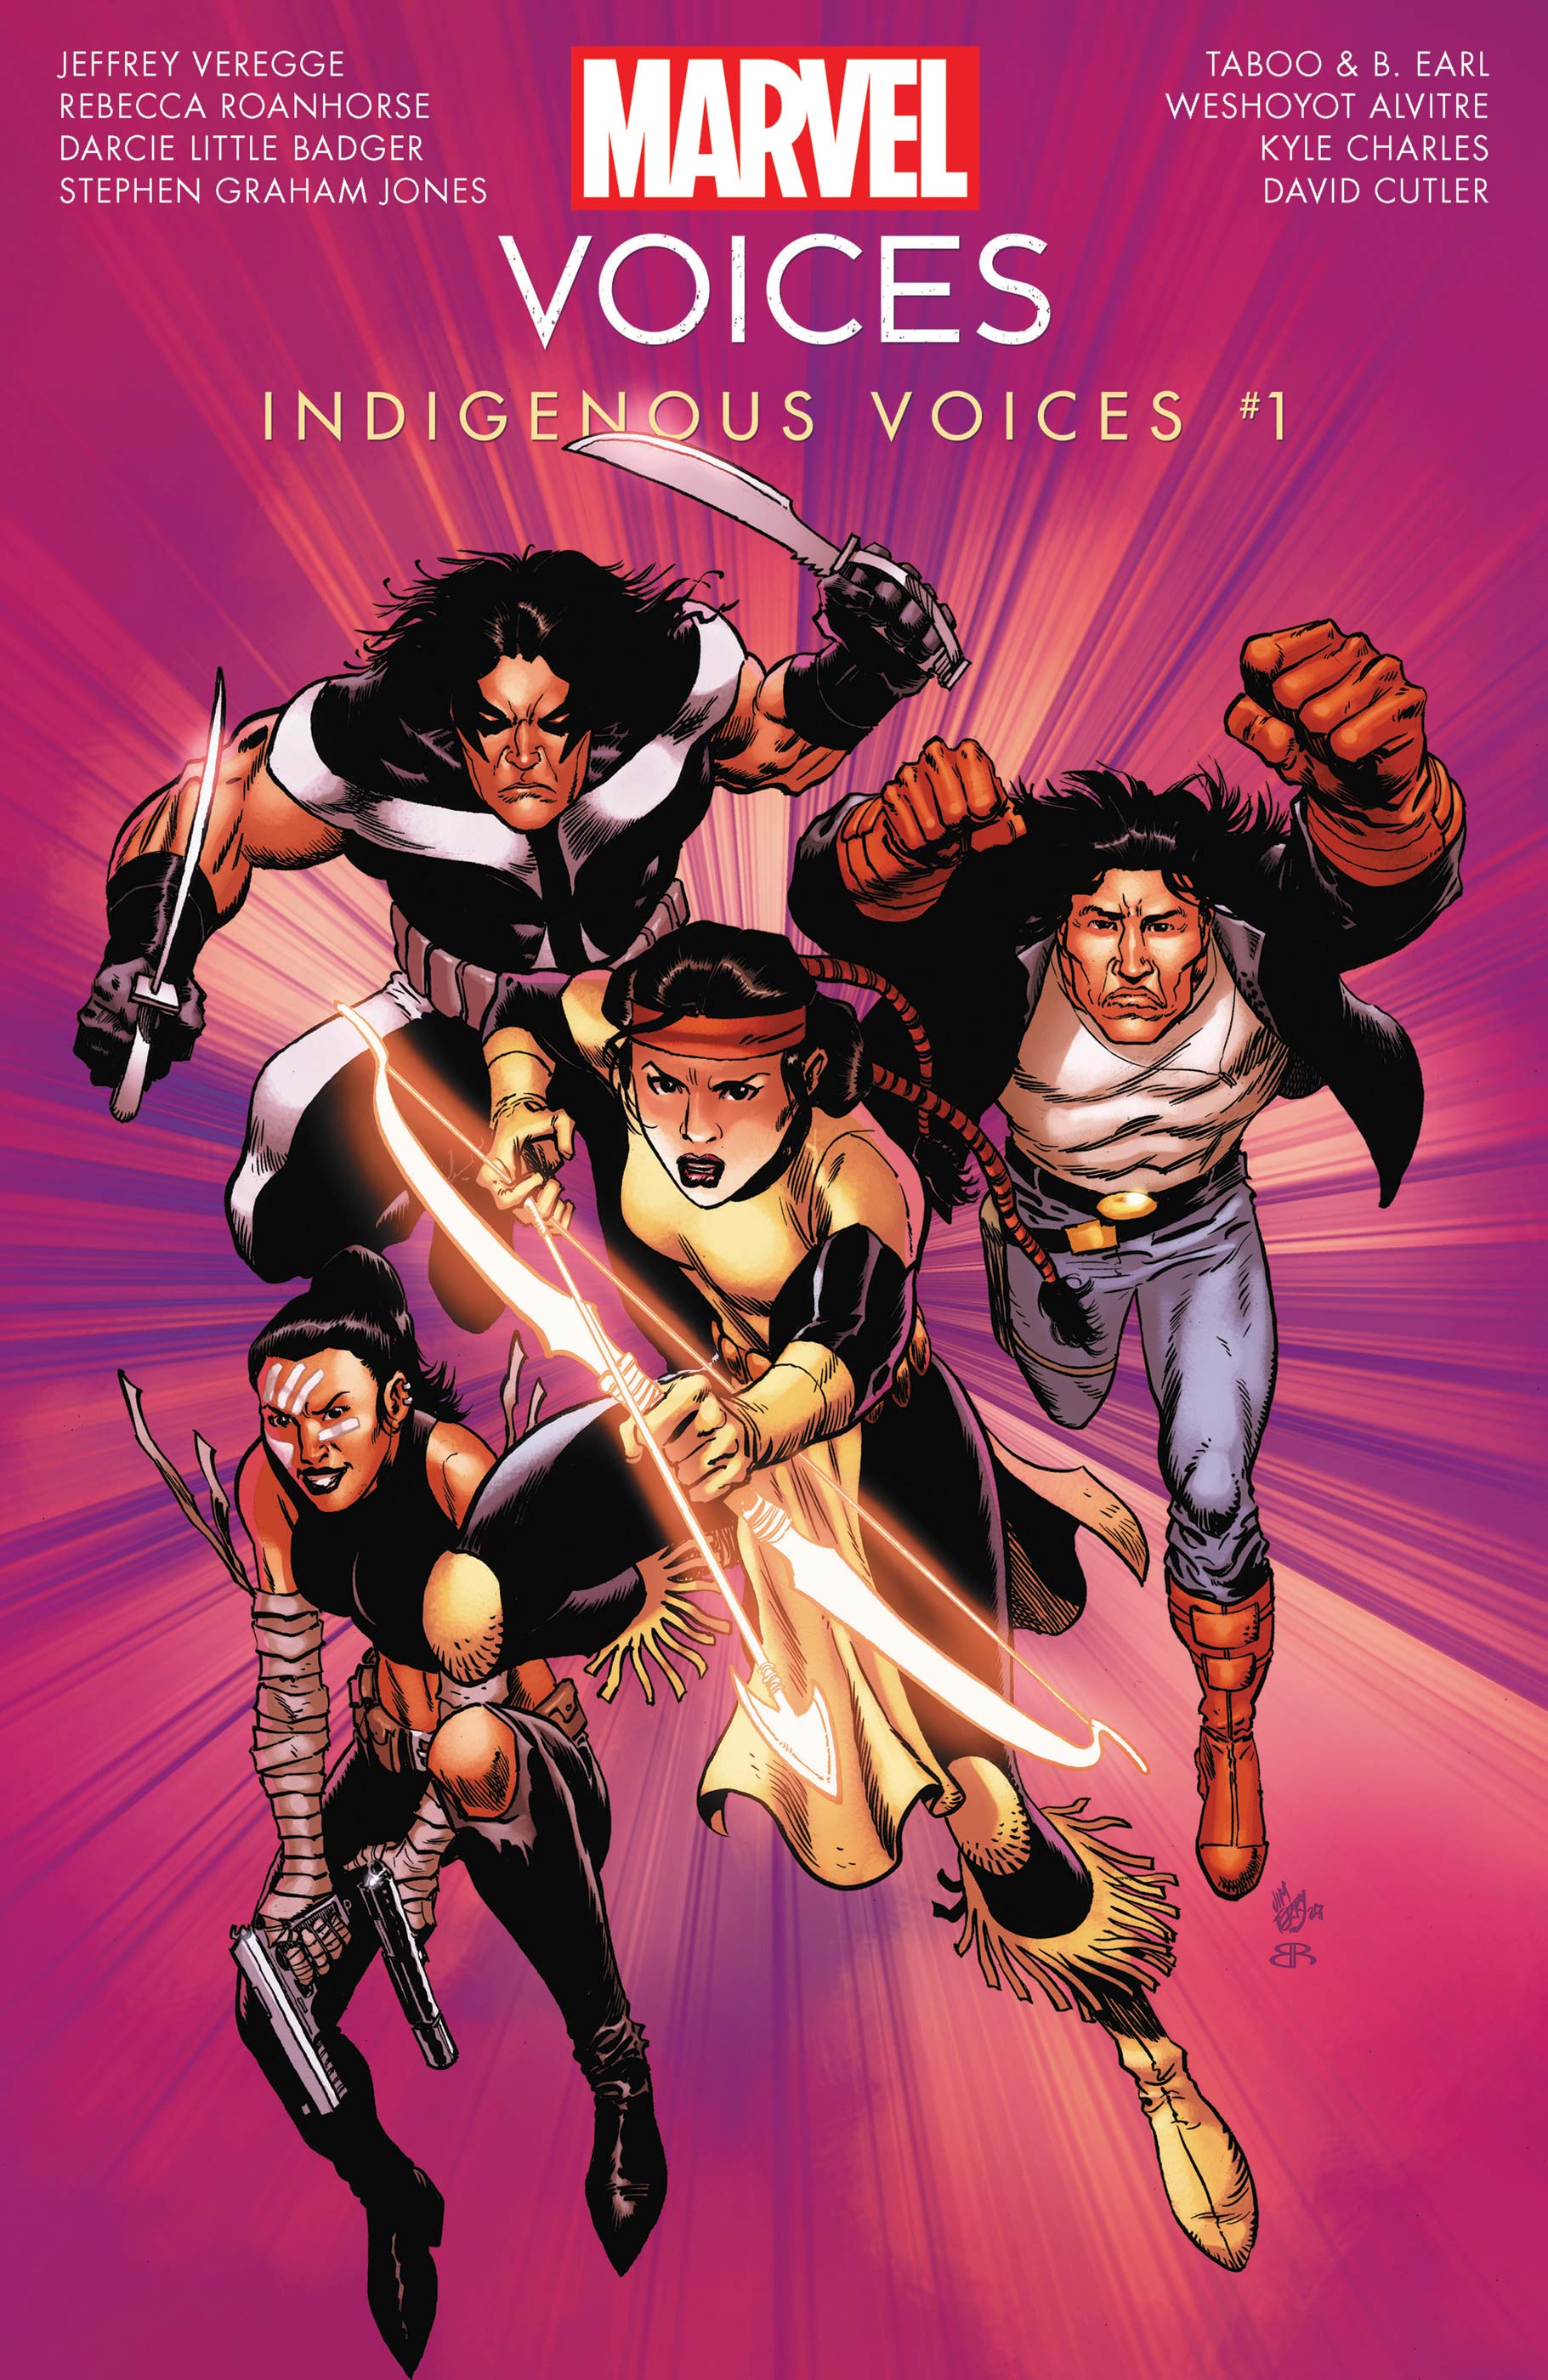 Marvel's Indigenous Voices #1 Cover by James Terry